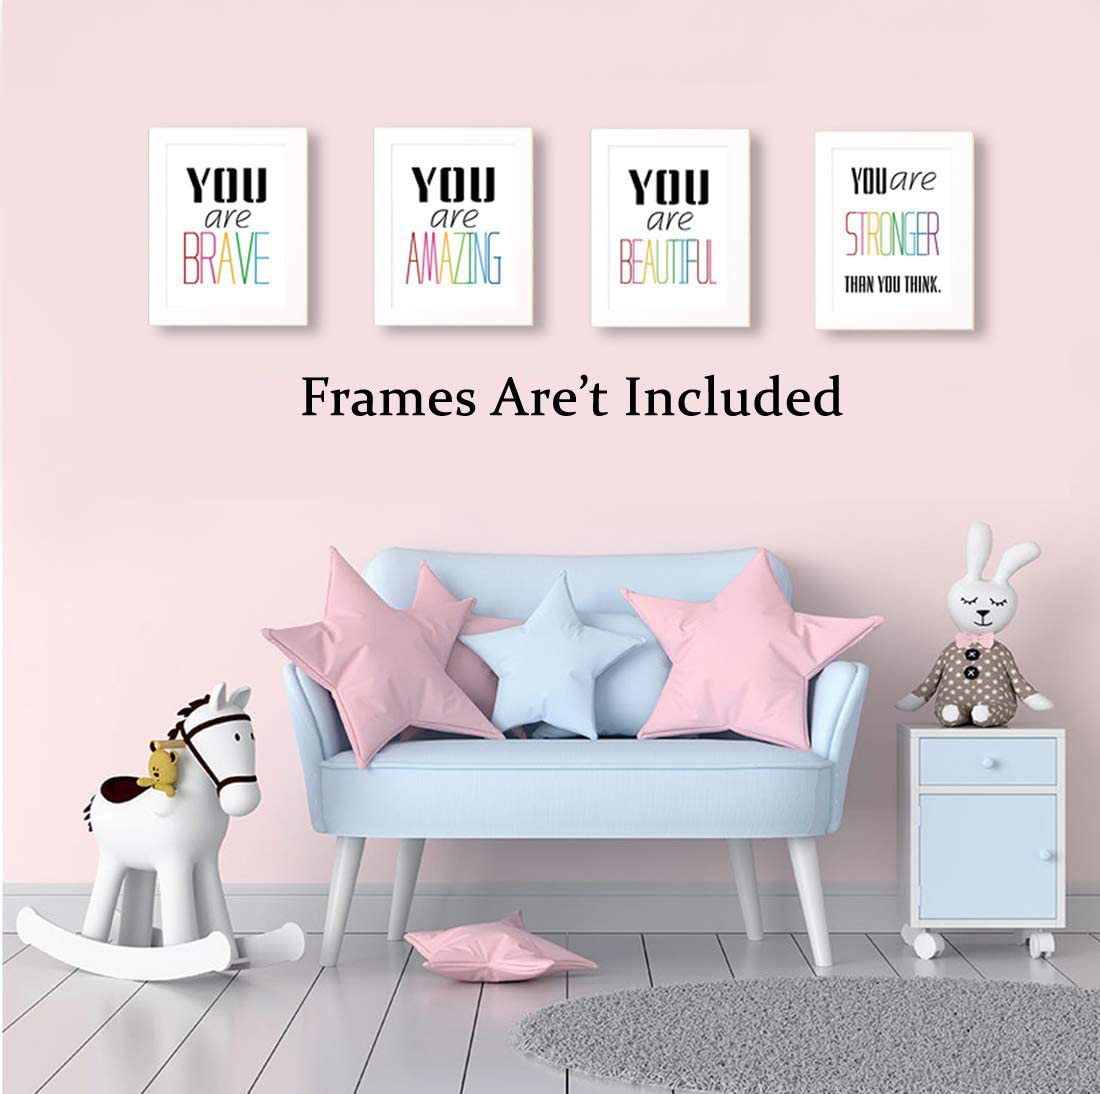 HPNIUB Typography Watercolor Words Inspirational Quote&Saying Modern Art Print Set of 4 (12”X16” Canvas Painting，Motivational Phrases Wall Art Poster for Nursery or Kids Room Home Decor，No Frame